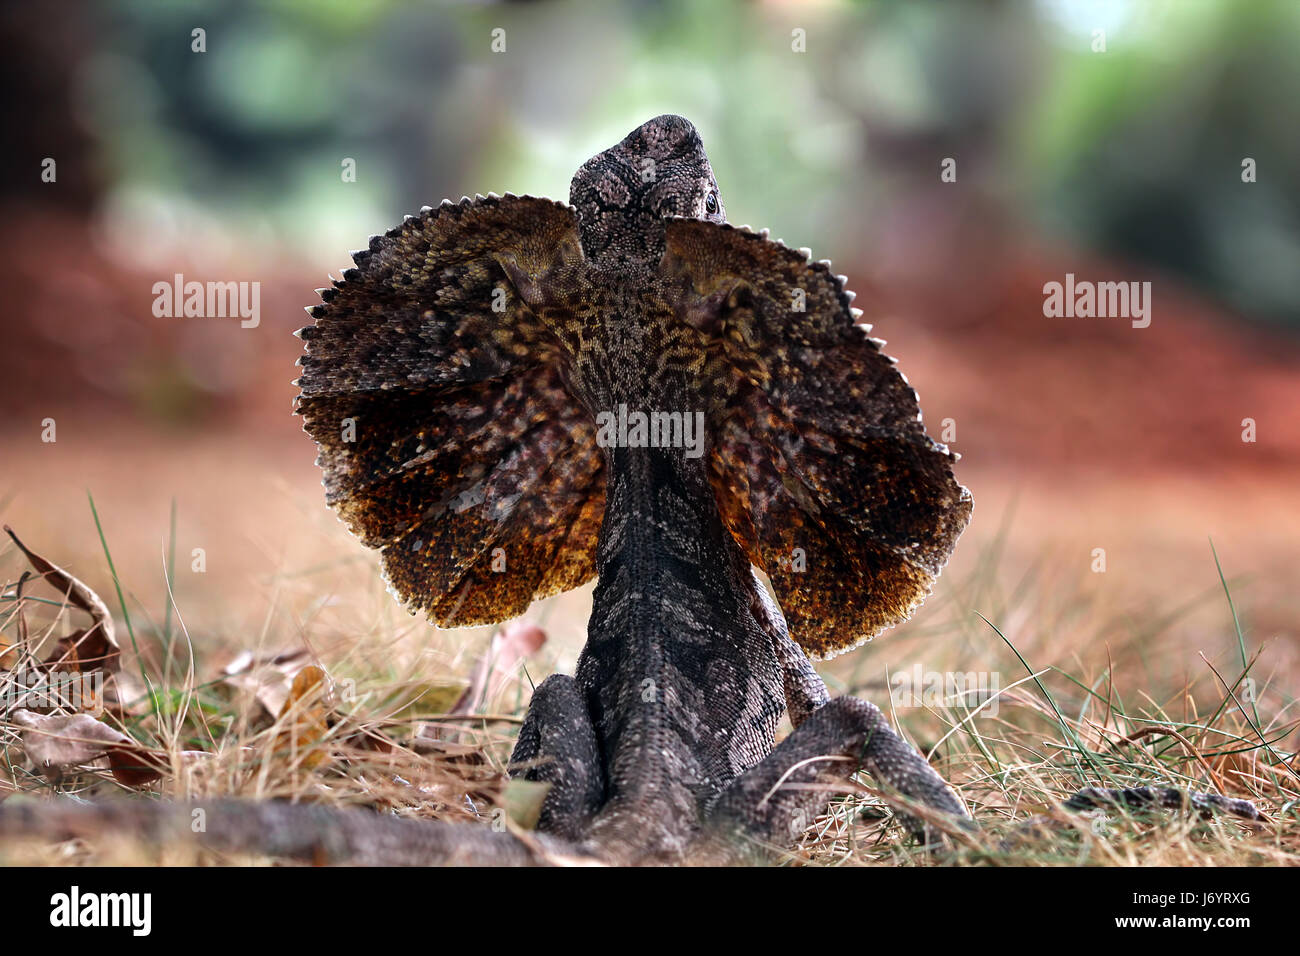 Angry frilled-neck lizard, Indonesia Stock Photo